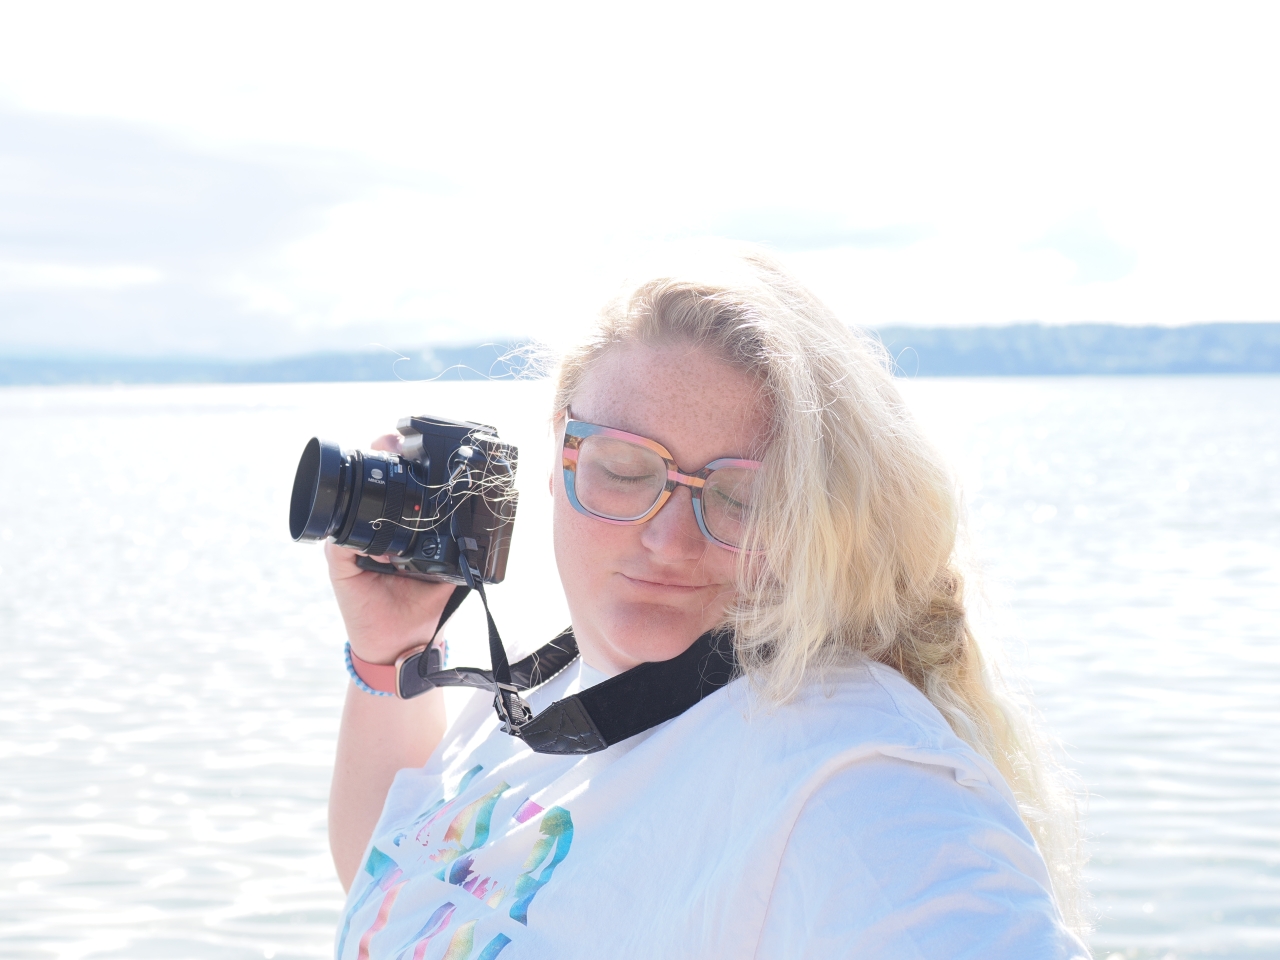 This portrait of Chelsea (taken on Camano) is one of my favorites.